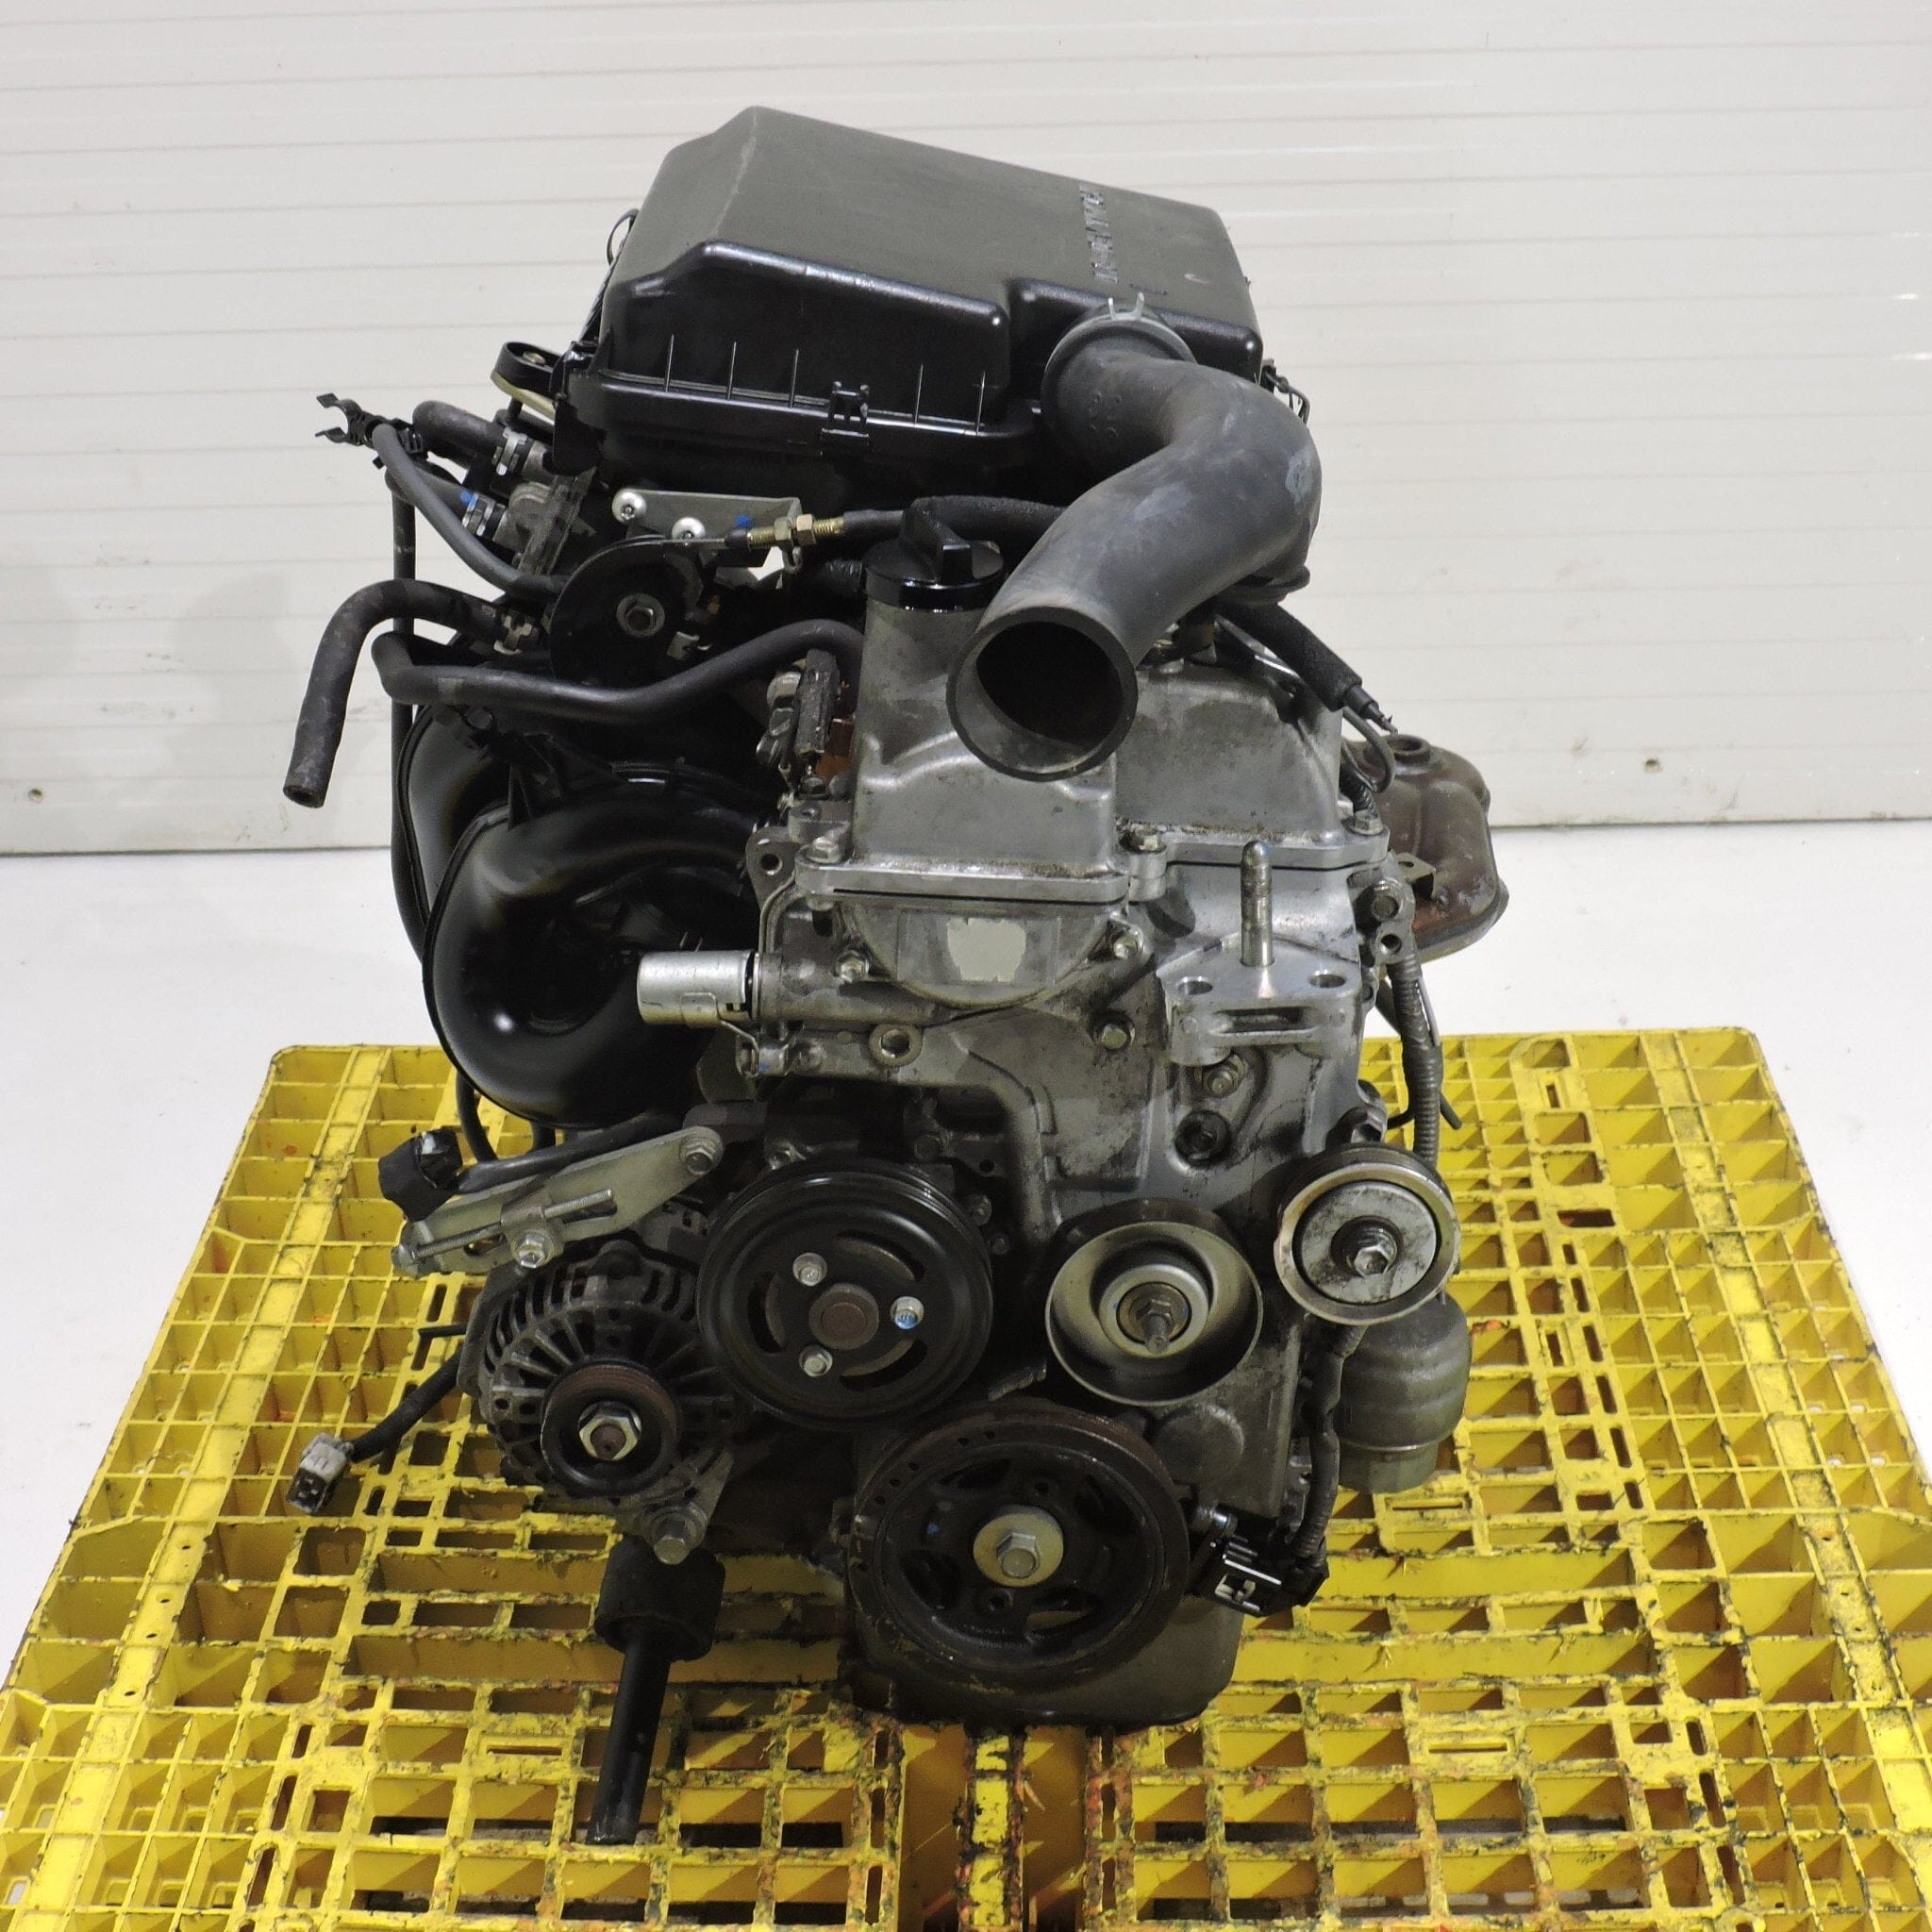 Toyota Echo 1999-2005 1.3L JDM Fwd Automatic Replacement Engine Swap- K3-VE